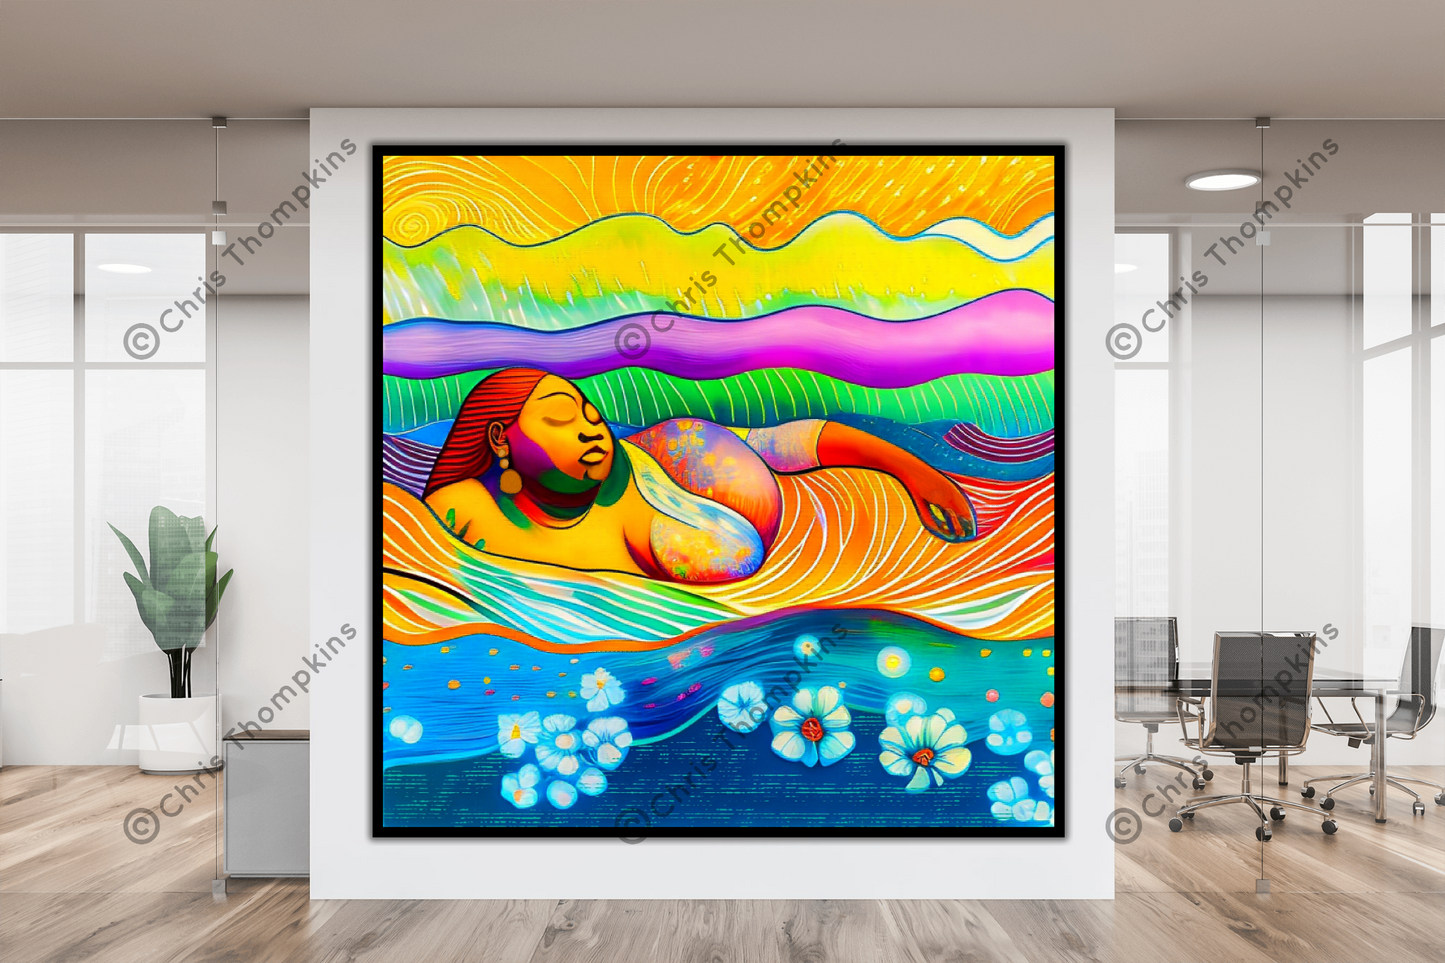 "Just Beauty" Giclee Signature Canvas - Limited Edition - Chris Thompkins